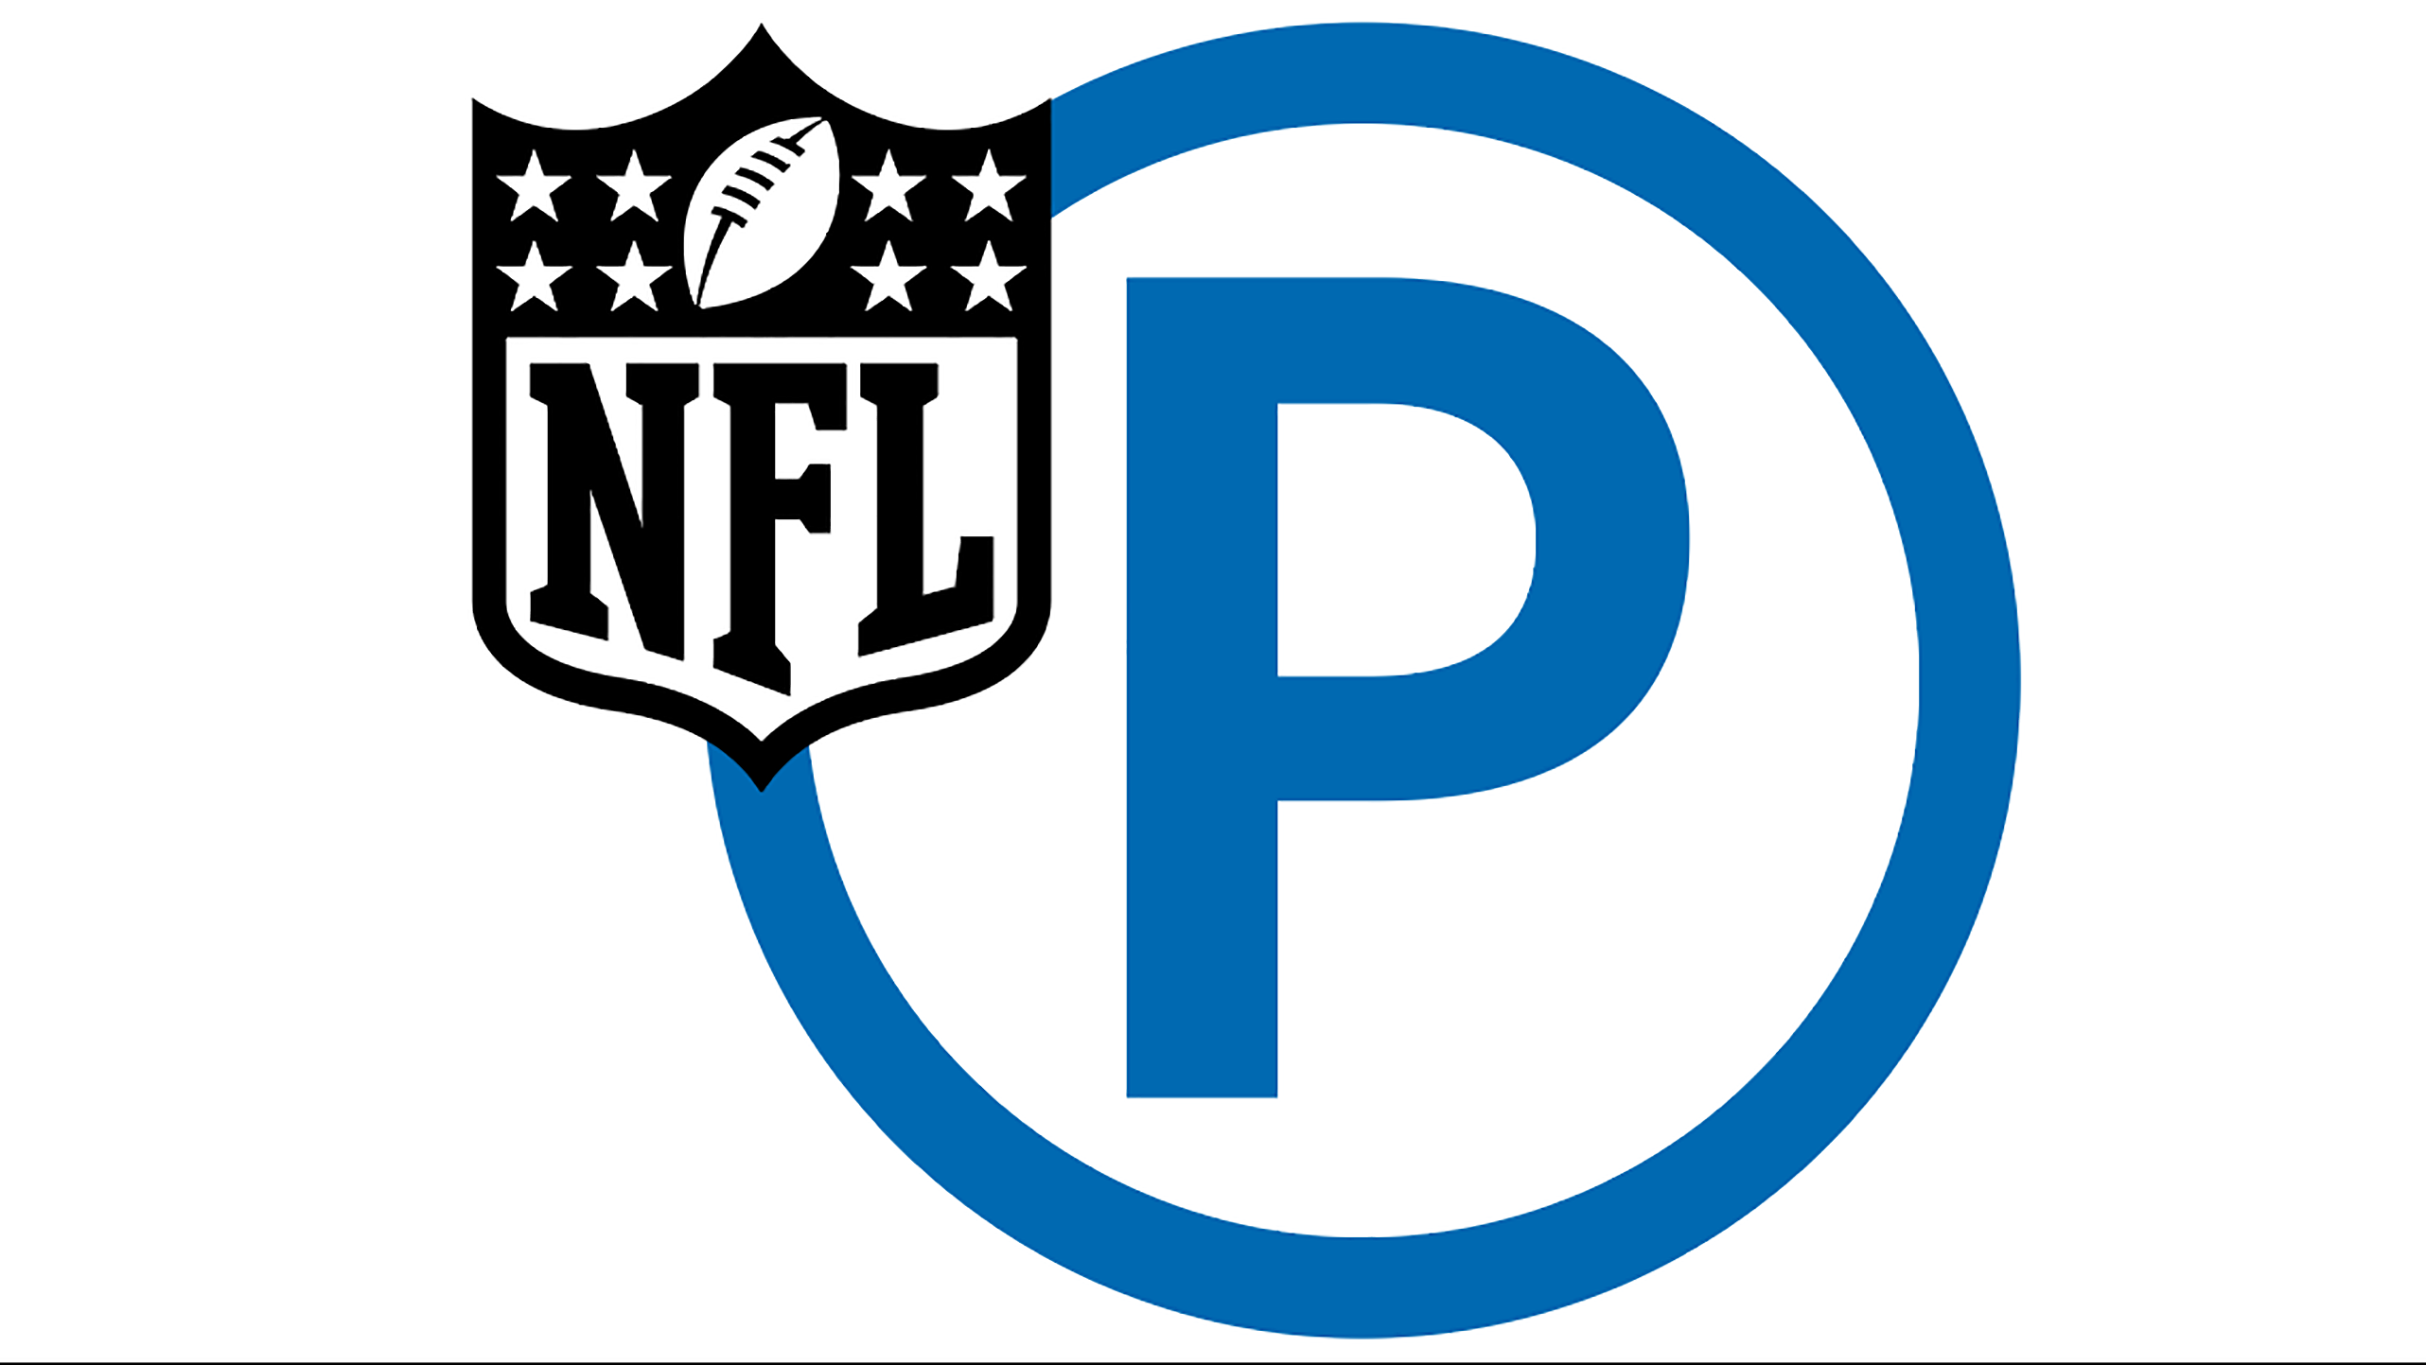 Parking Only - Giants v. Colts in East Rutherford promo photo for Resale Onsale presale offer code